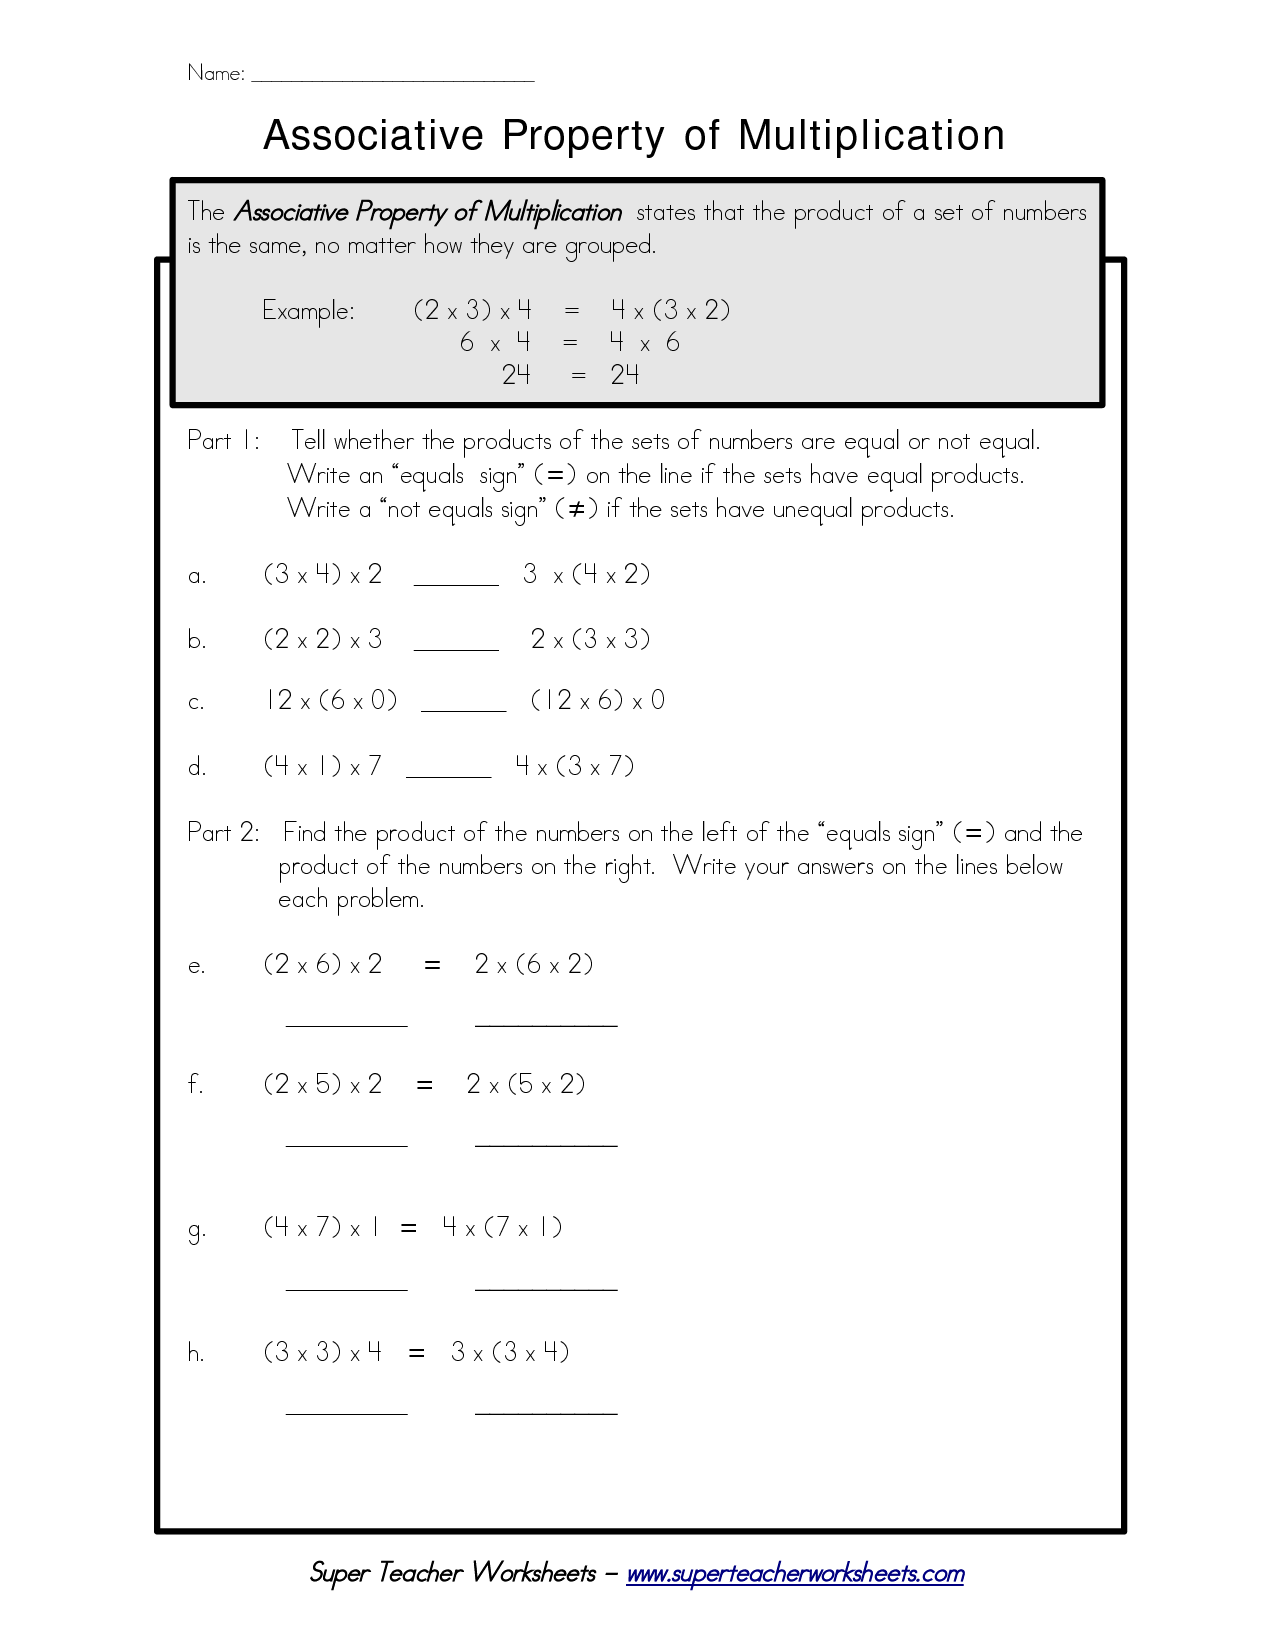 16-best-images-of-distributive-property-worksheets-printable-distributive-property-worksheets